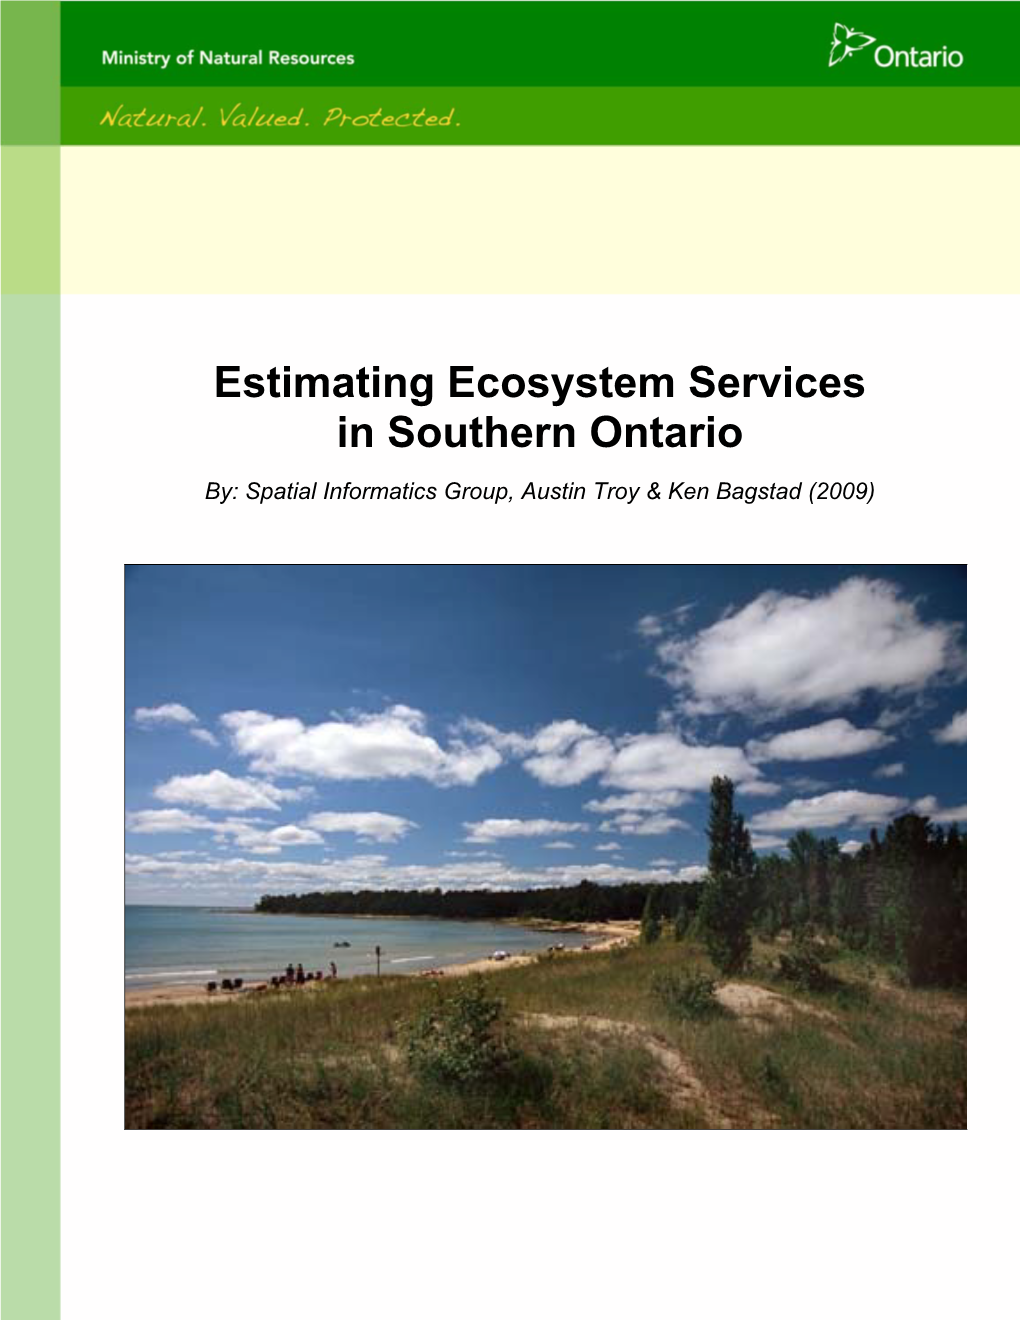 Estimating Ecosystem Services in Southern Ontario